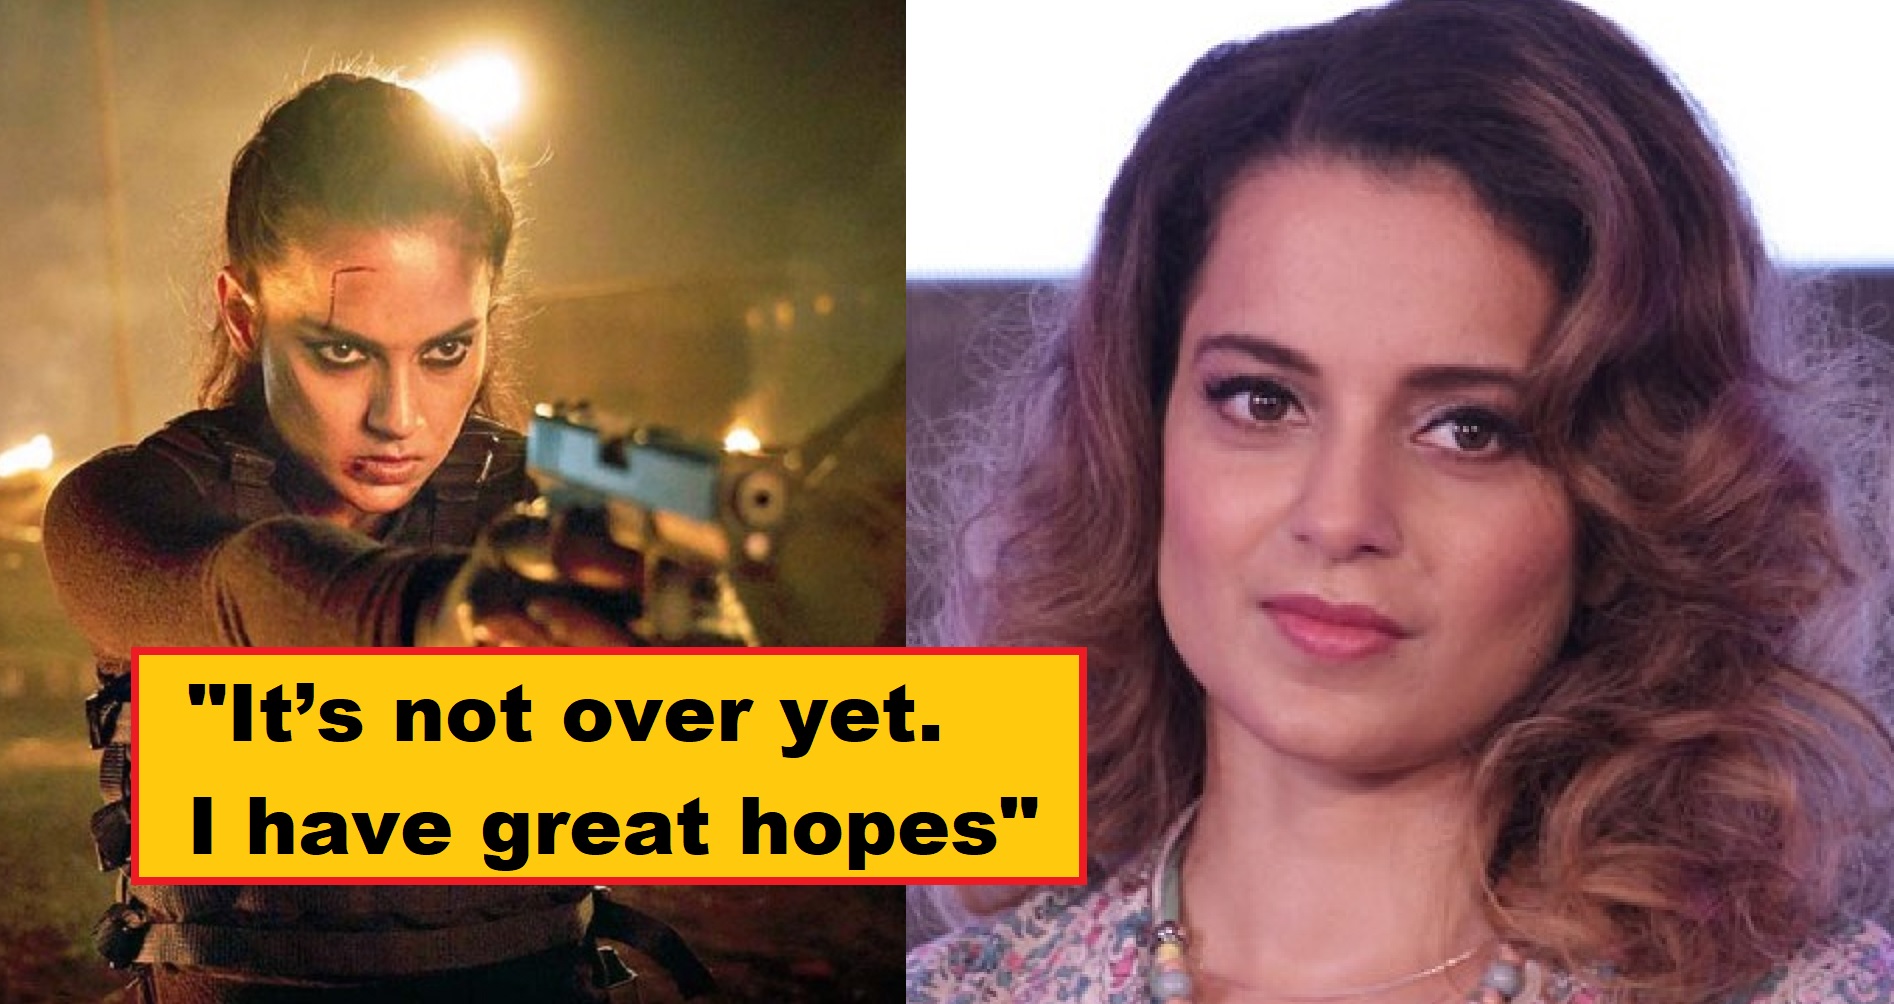 Kangana Ranaut Finally Speaks After Dhaakad Failure: “I see a lot of curated negativity.. it’s not over yet”